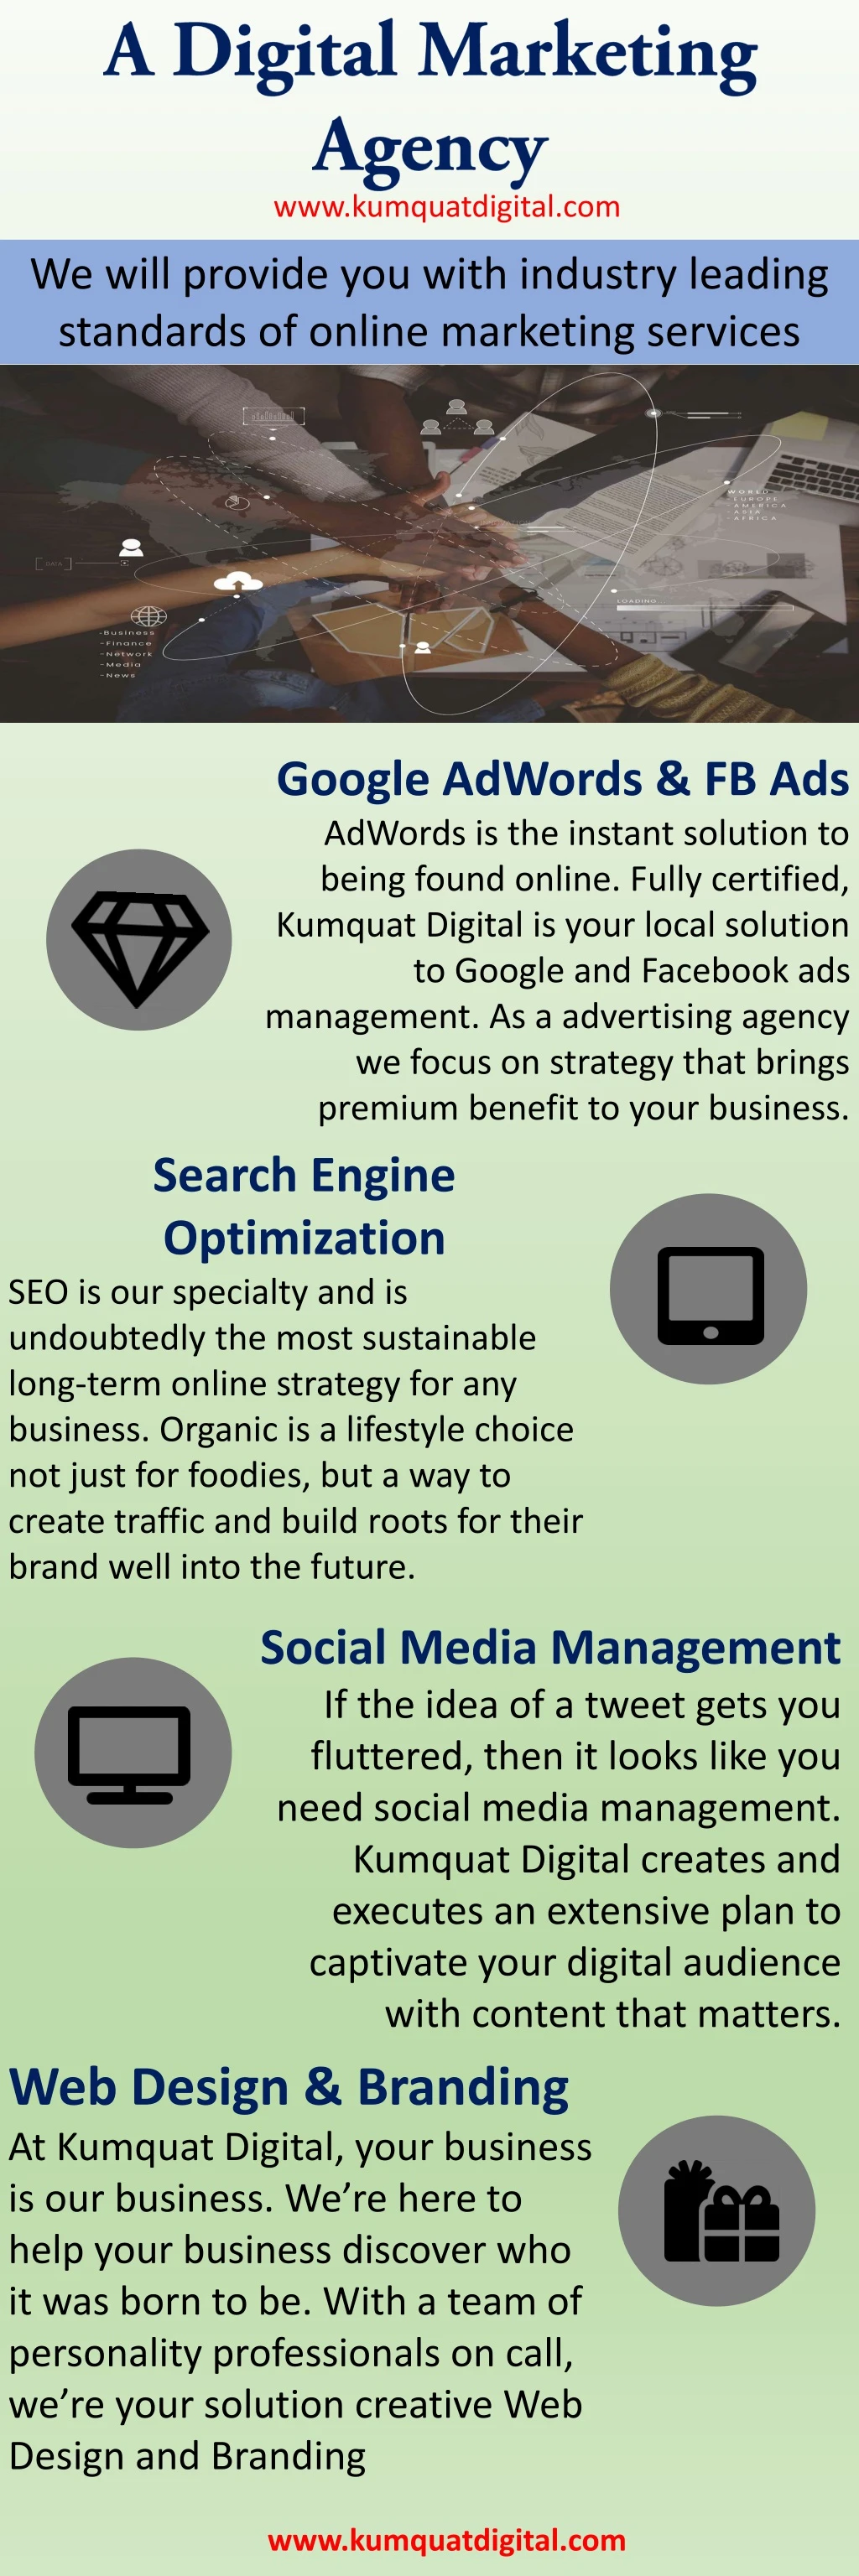 search engine optimization seo is our specialty